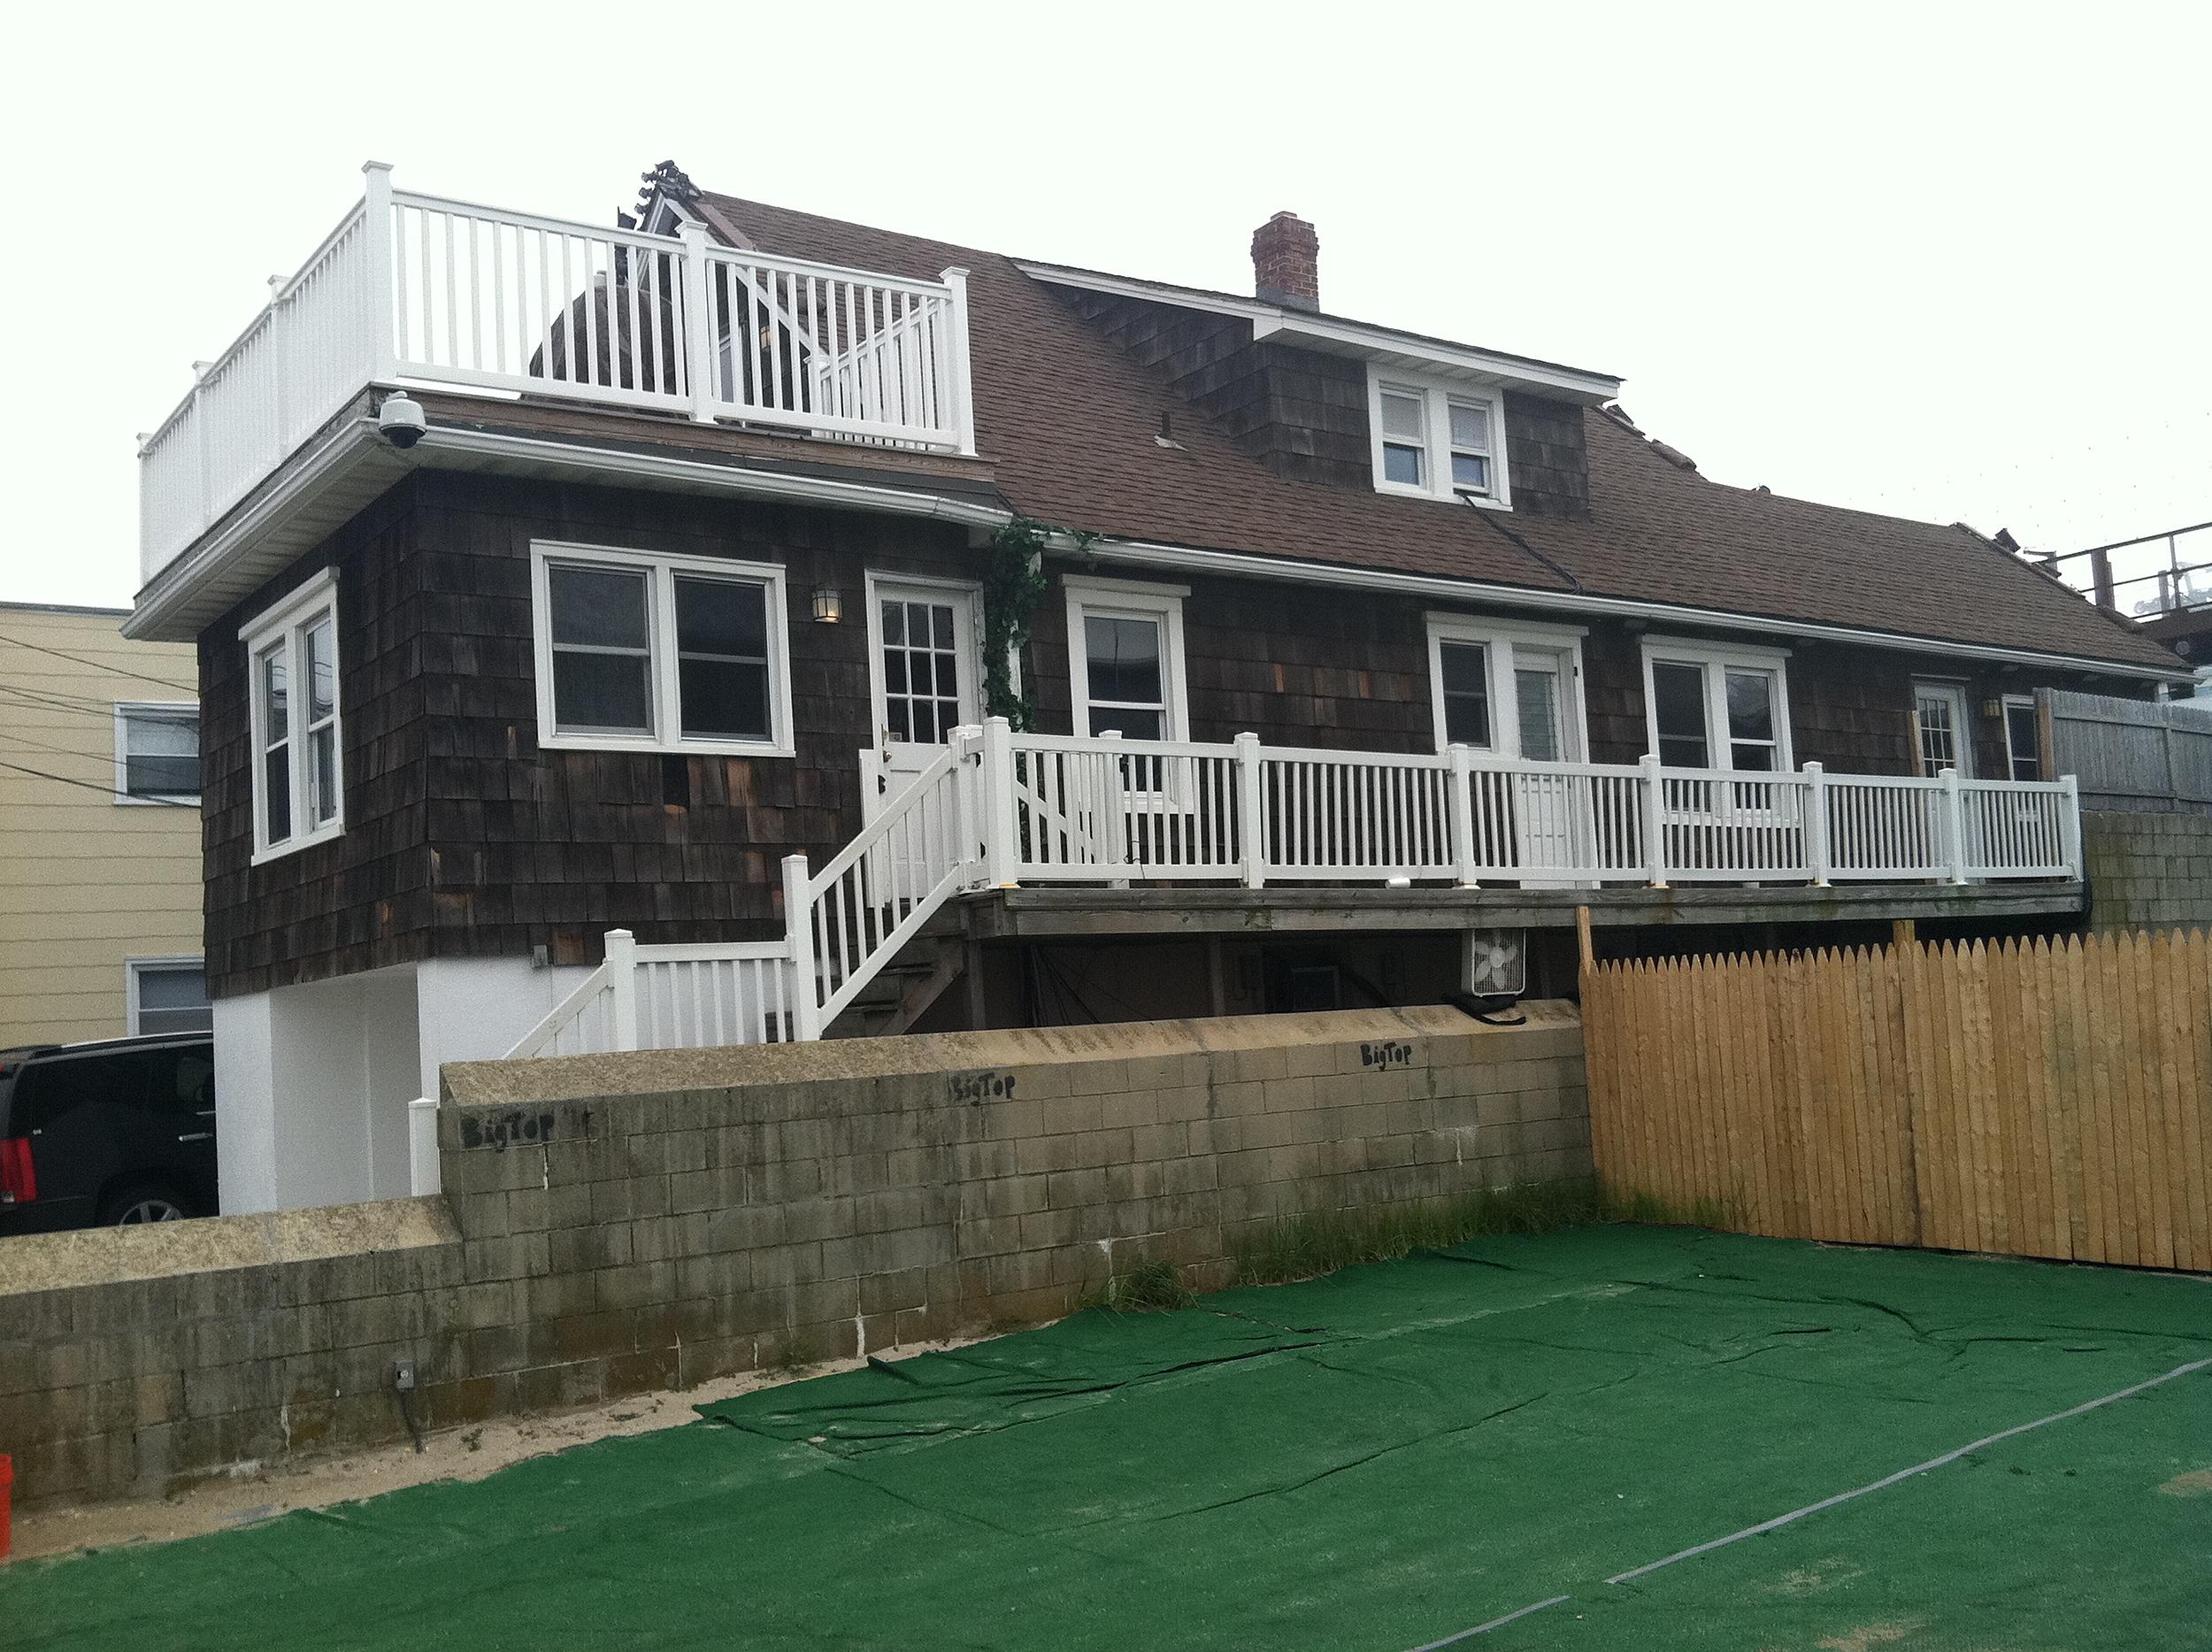 Rent the "Jersey Shore" House in Seaside Heights